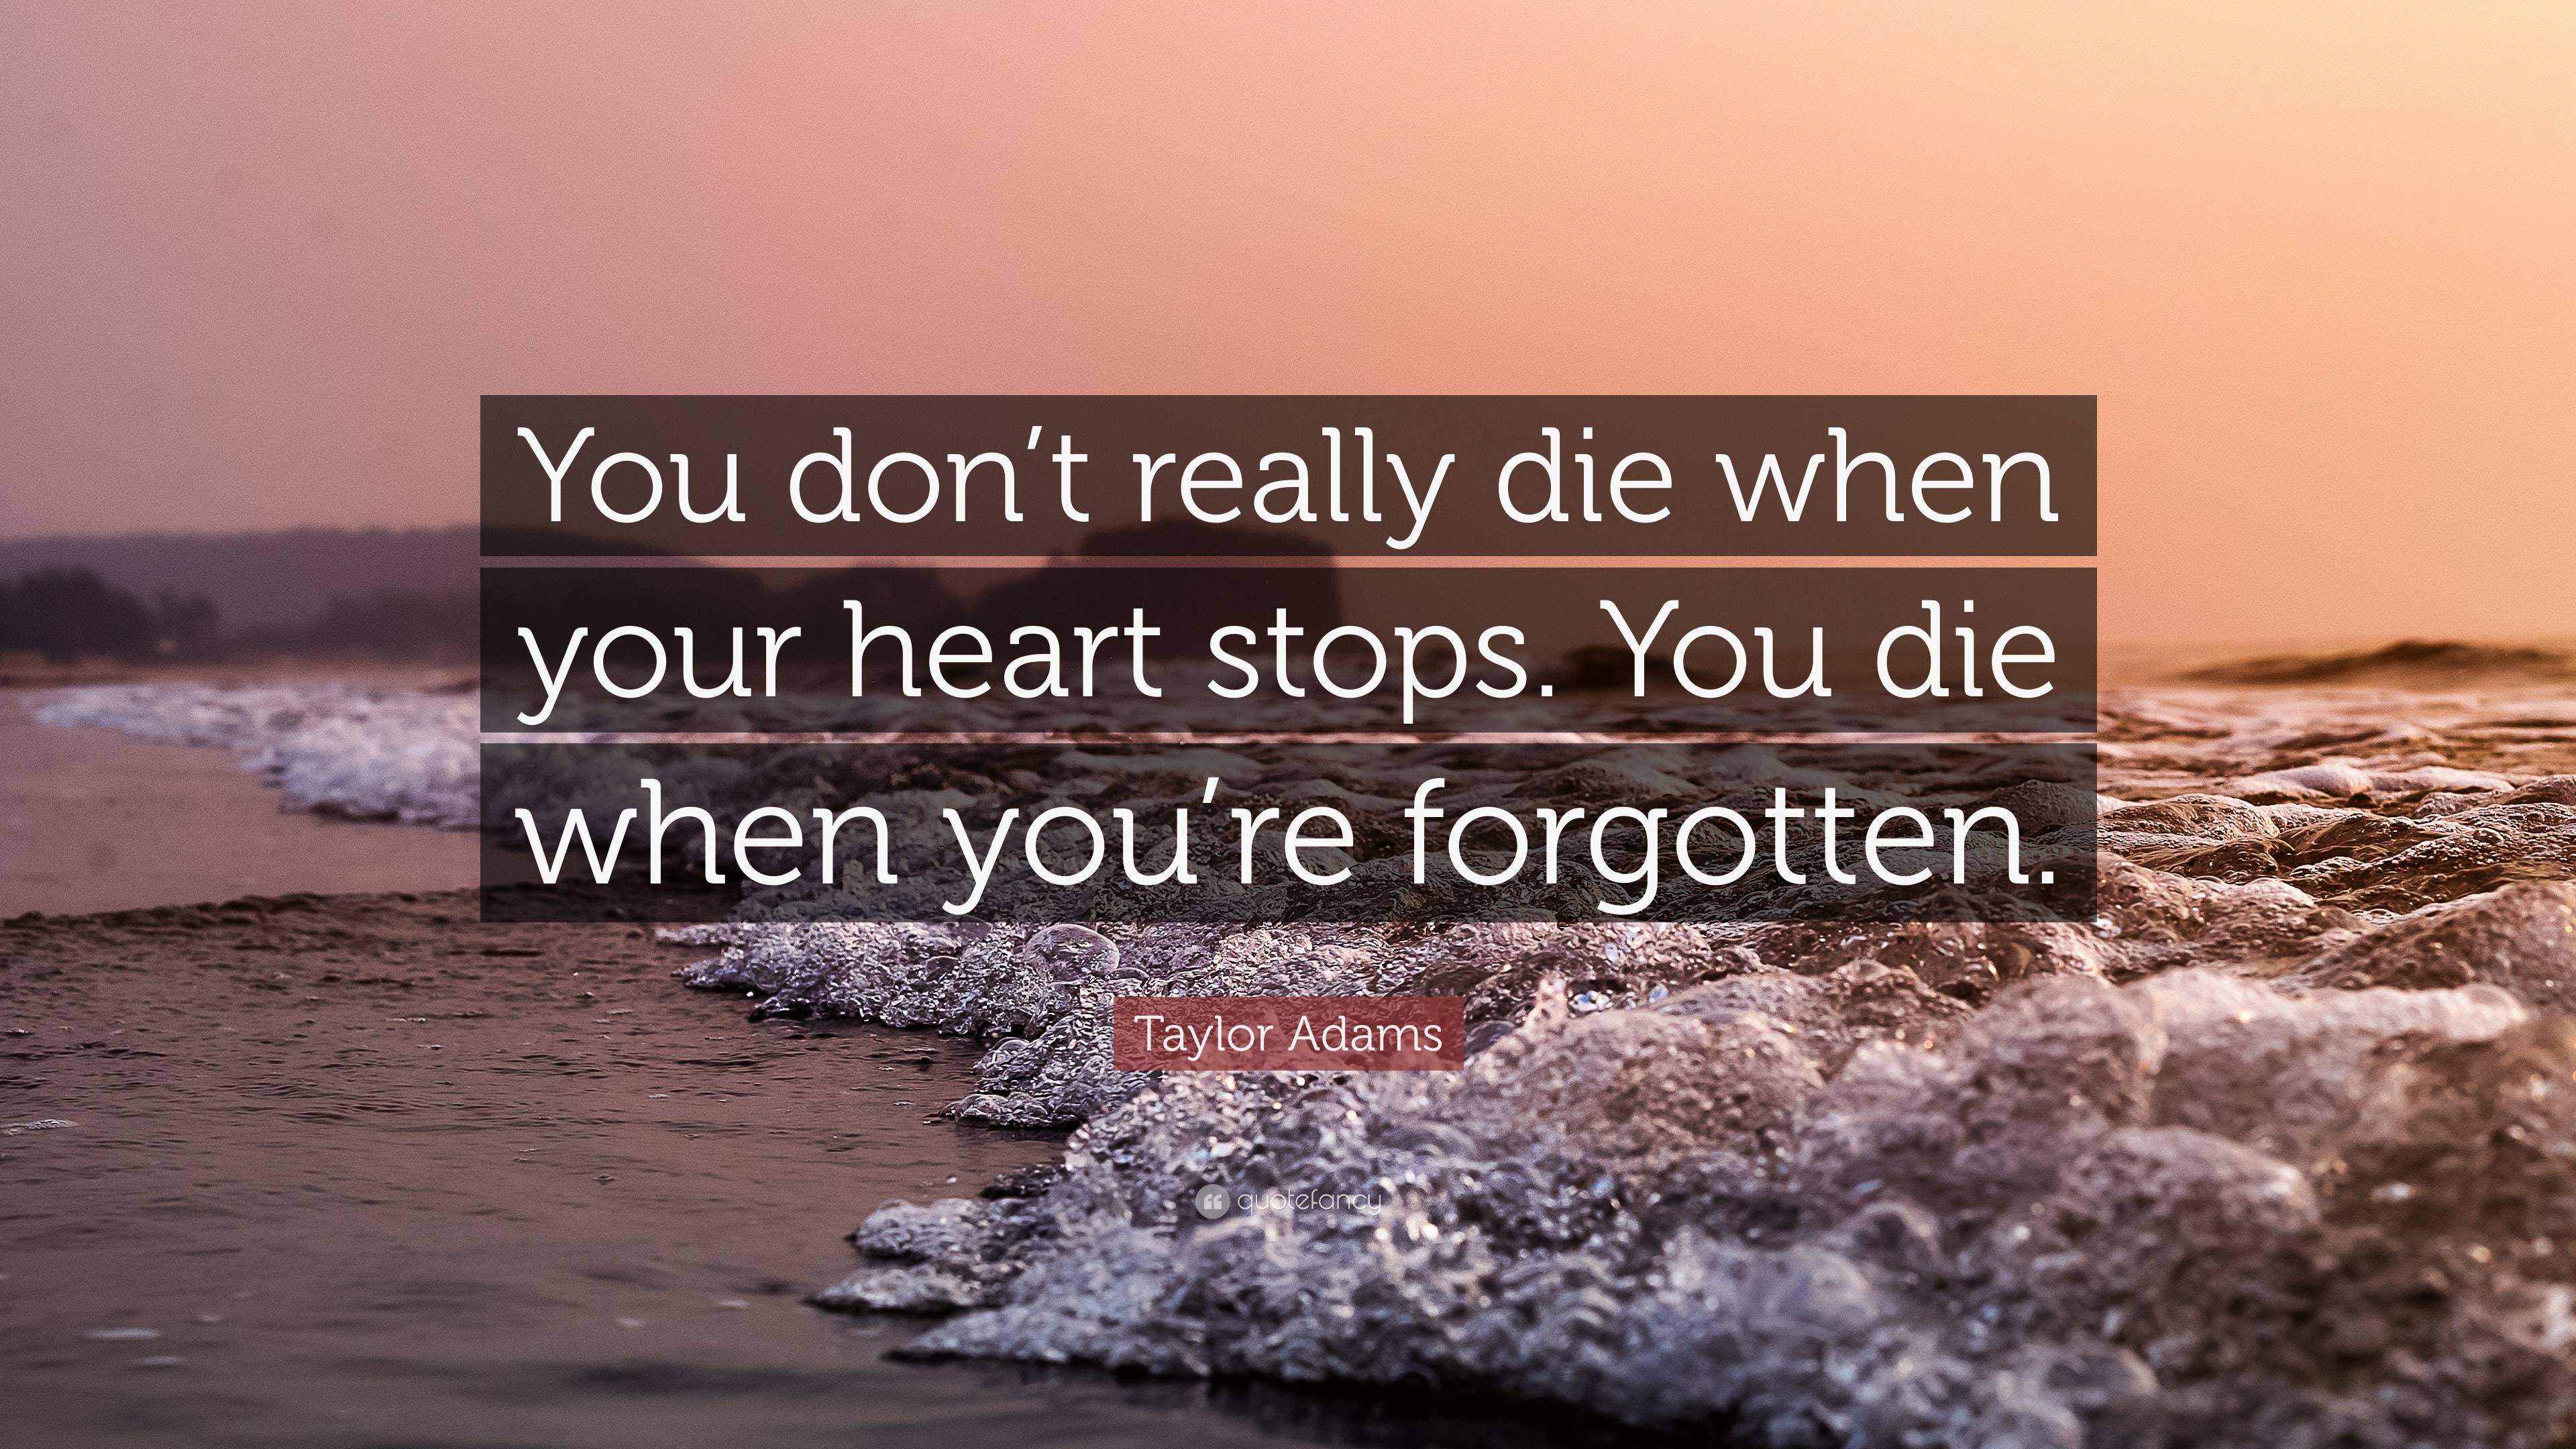 Taylor Adams Quote: “You don’t really die when your heart stops. You ...